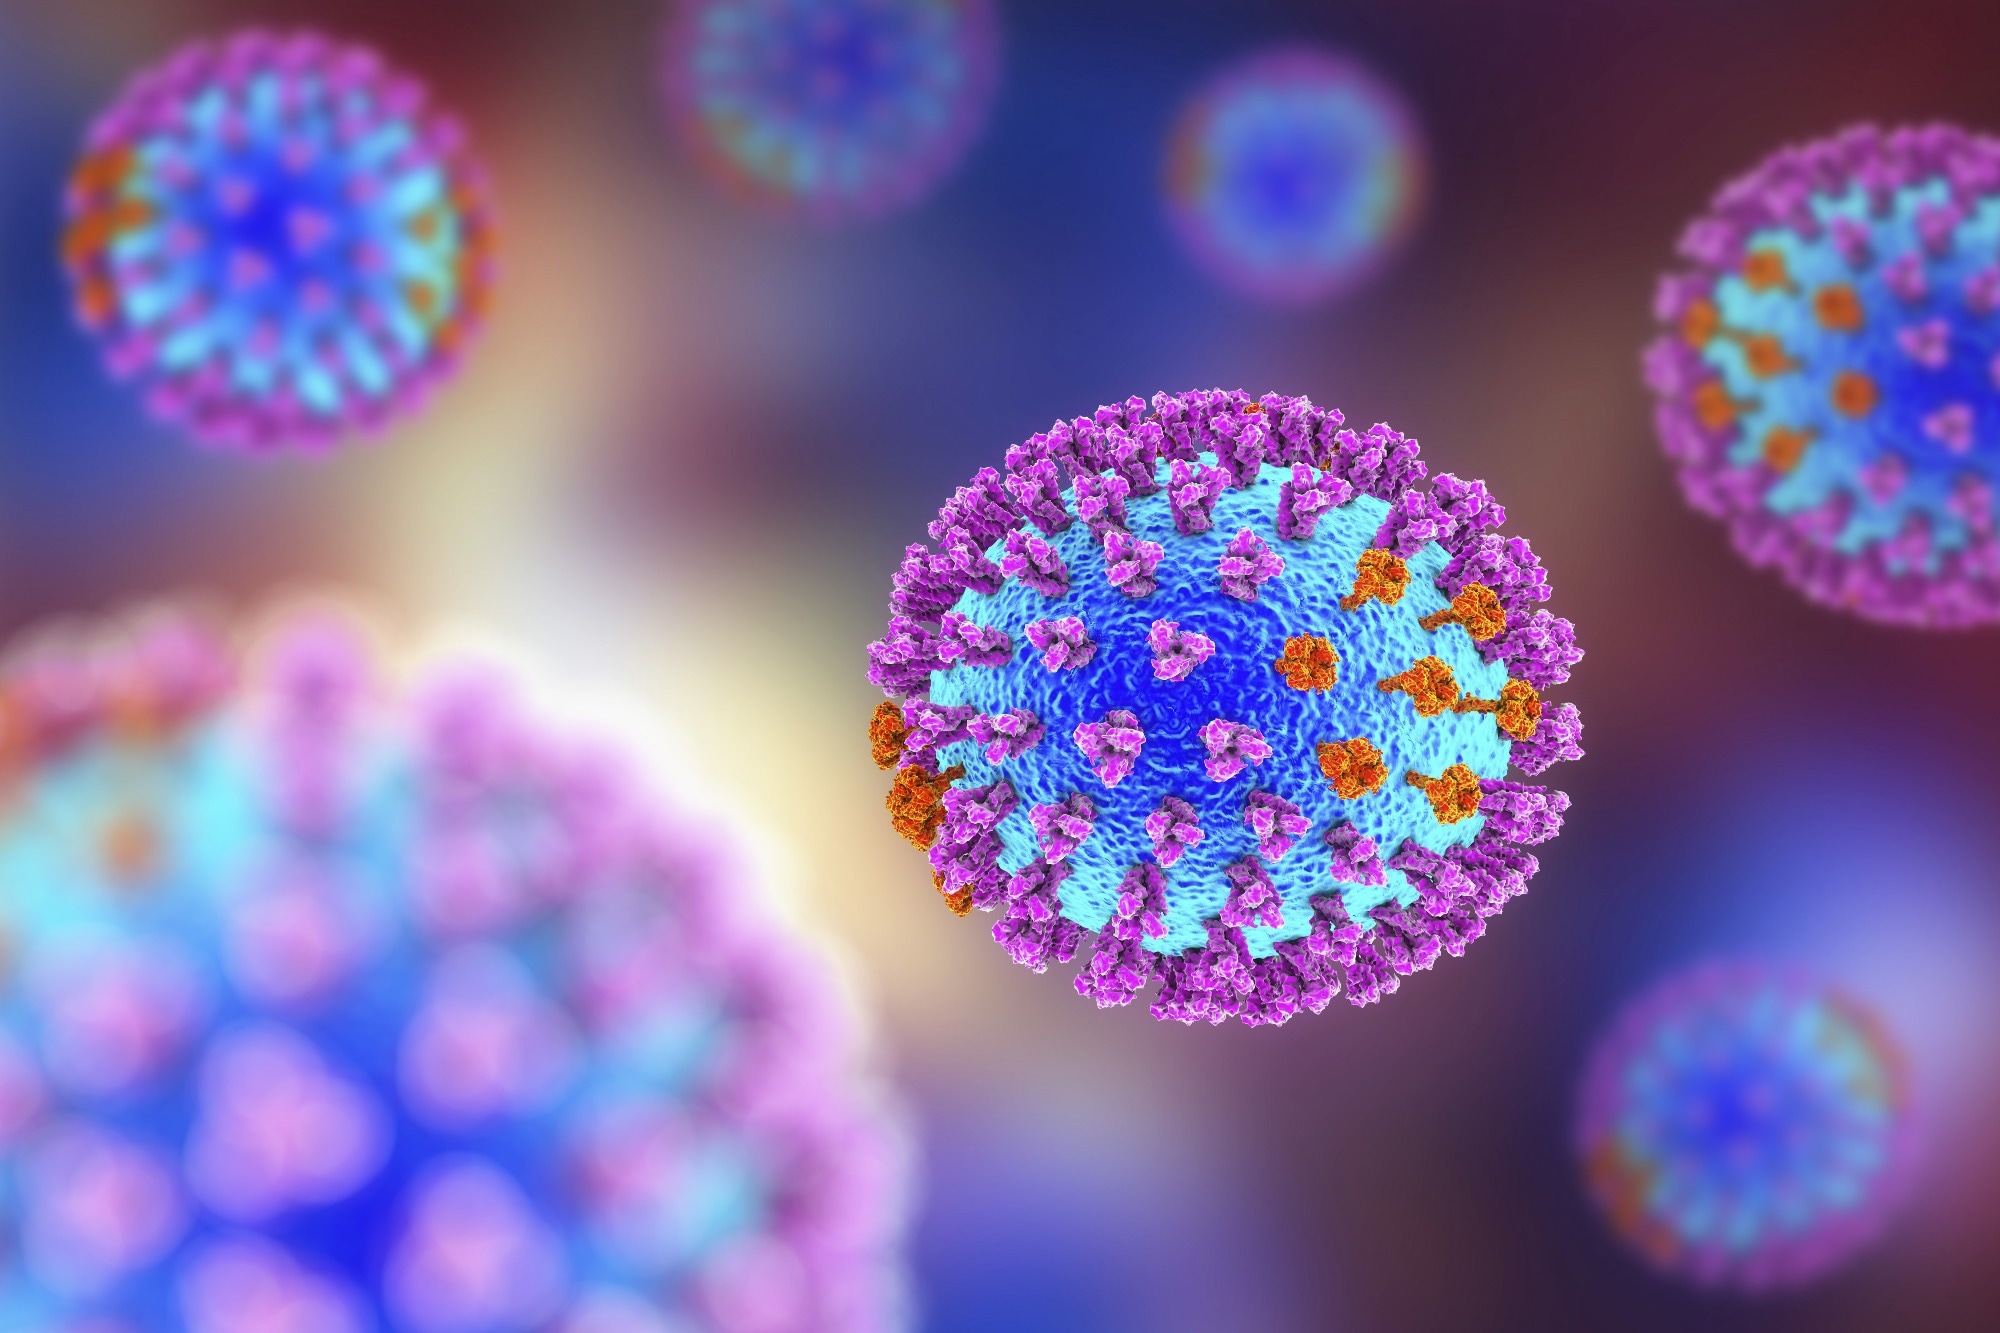 Study: Maternal exposure to ultrafine particles enhances influenza infection during pregnancy. Image Credit: KaterynaKon/Shutterstock.com